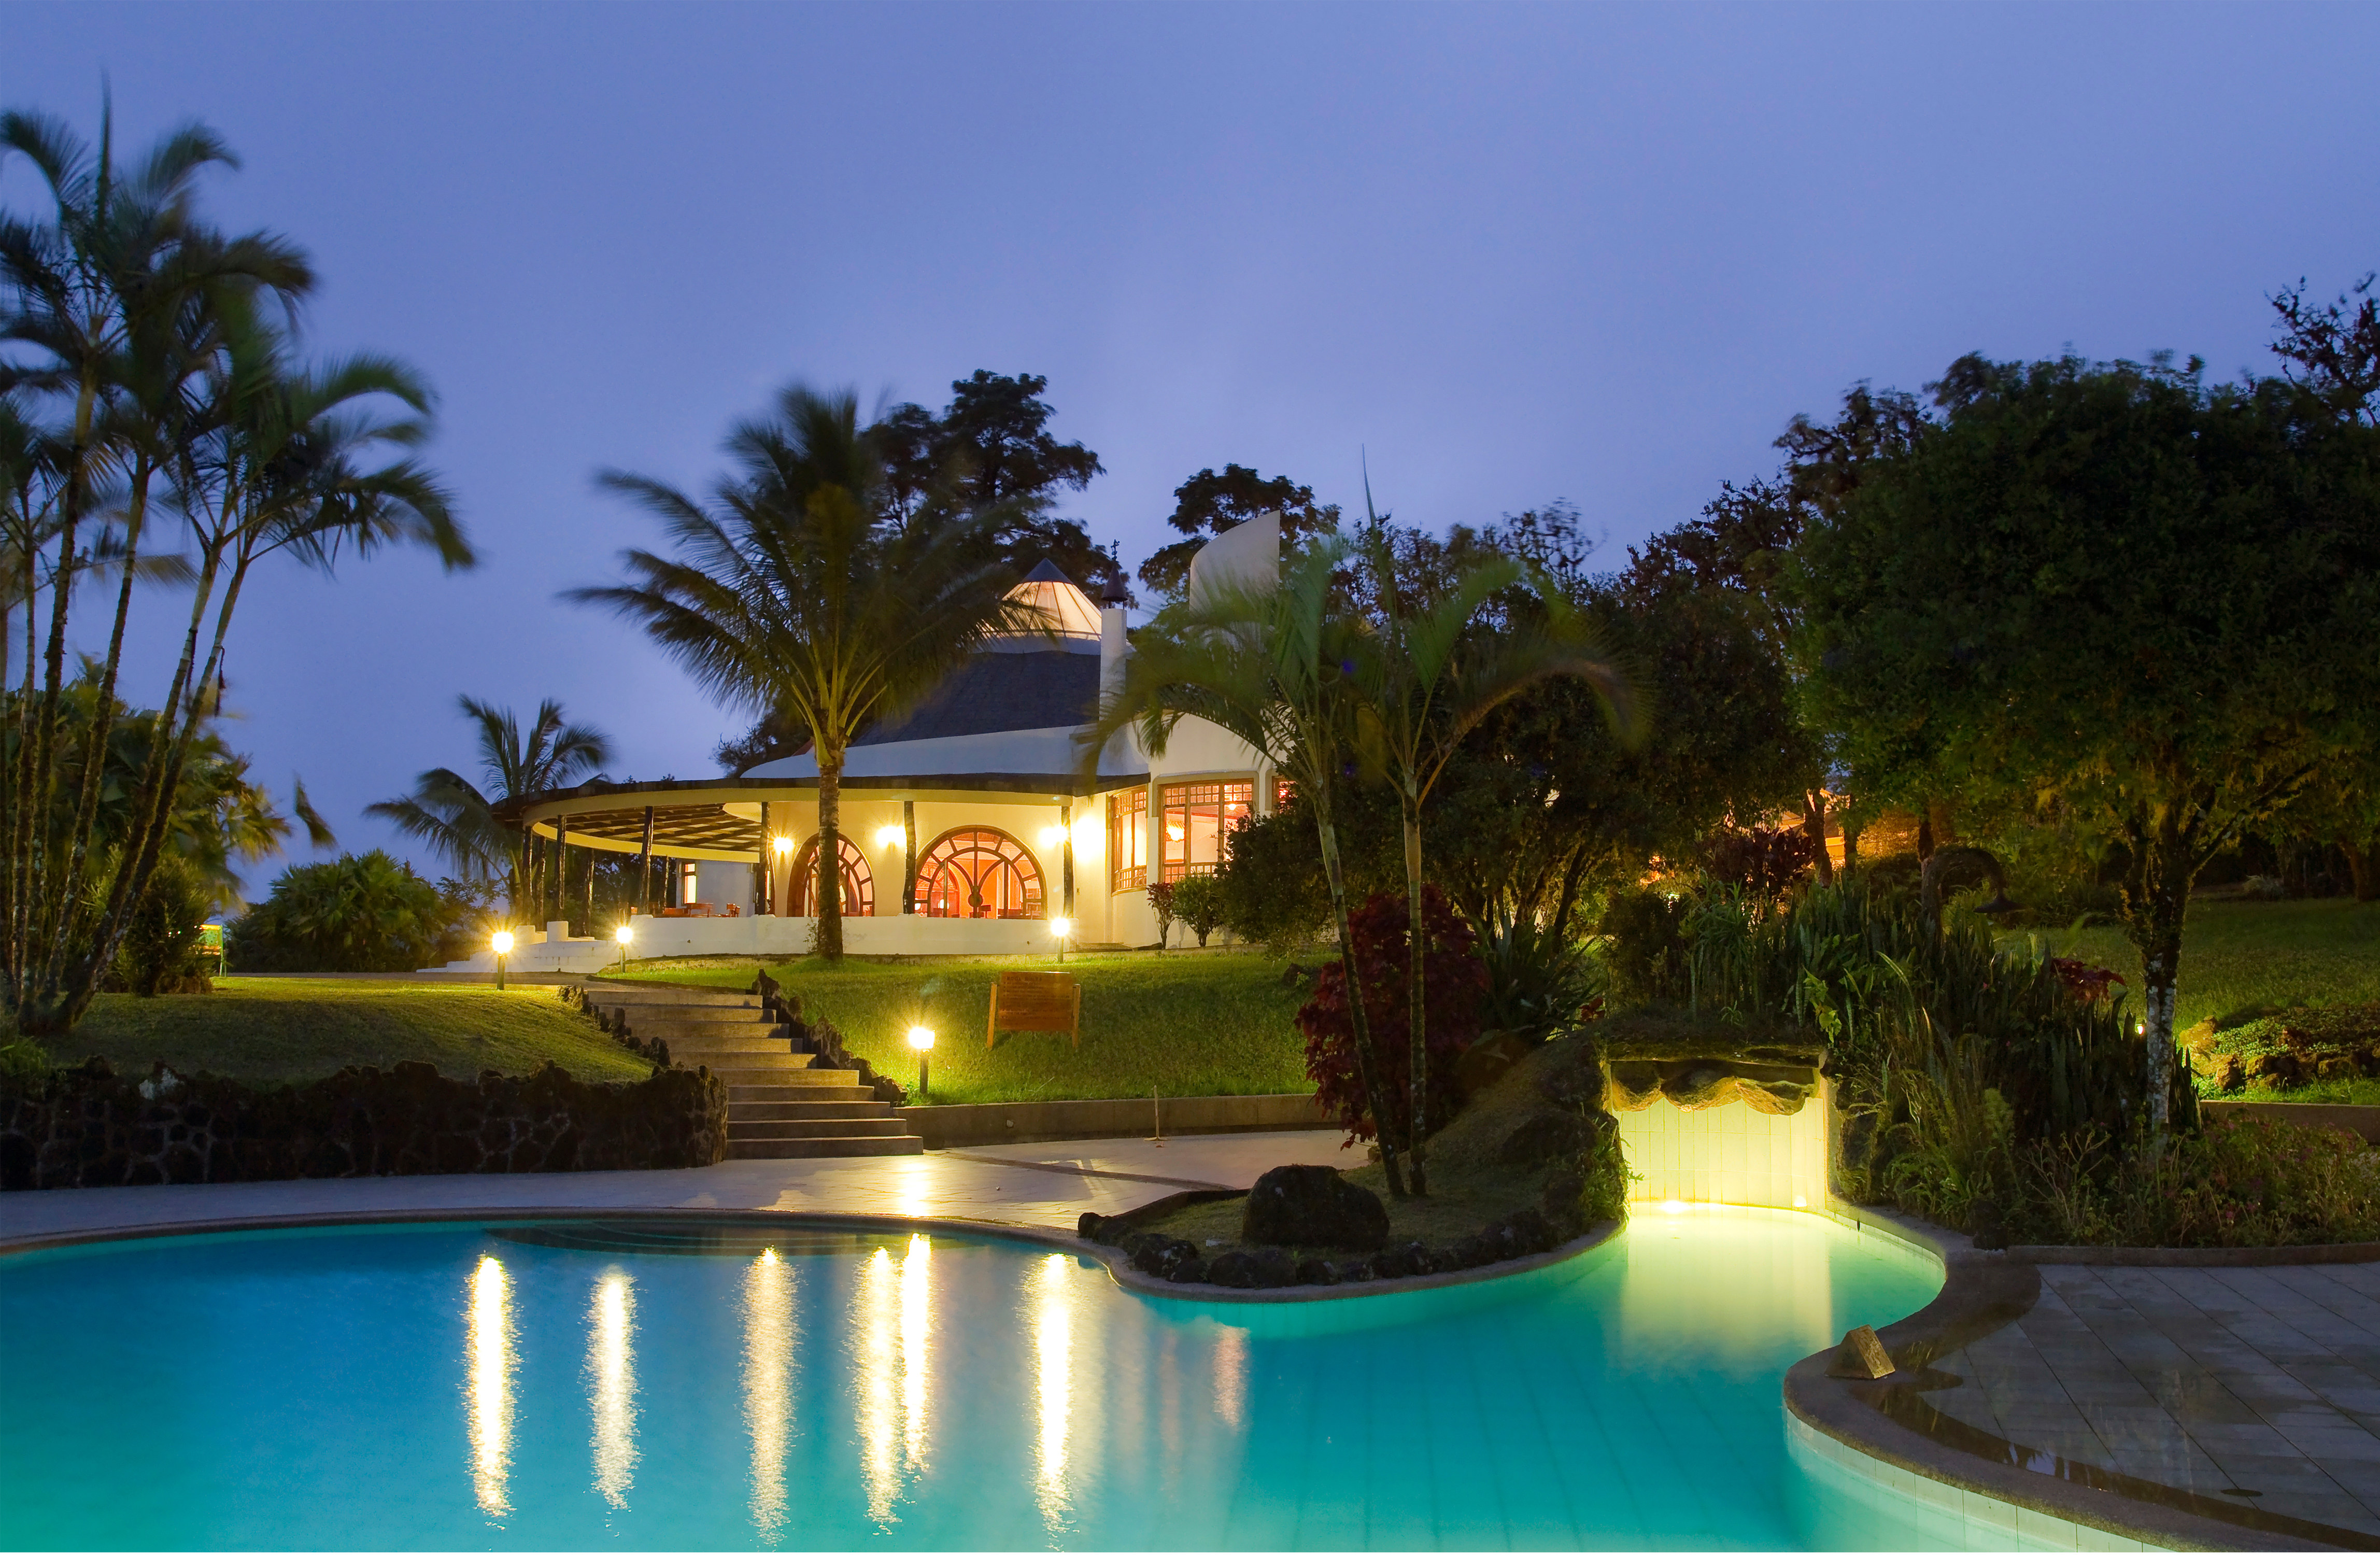 Royal Palm Galapagos, Curio Collection by Hilton Exterior at Night with Pool